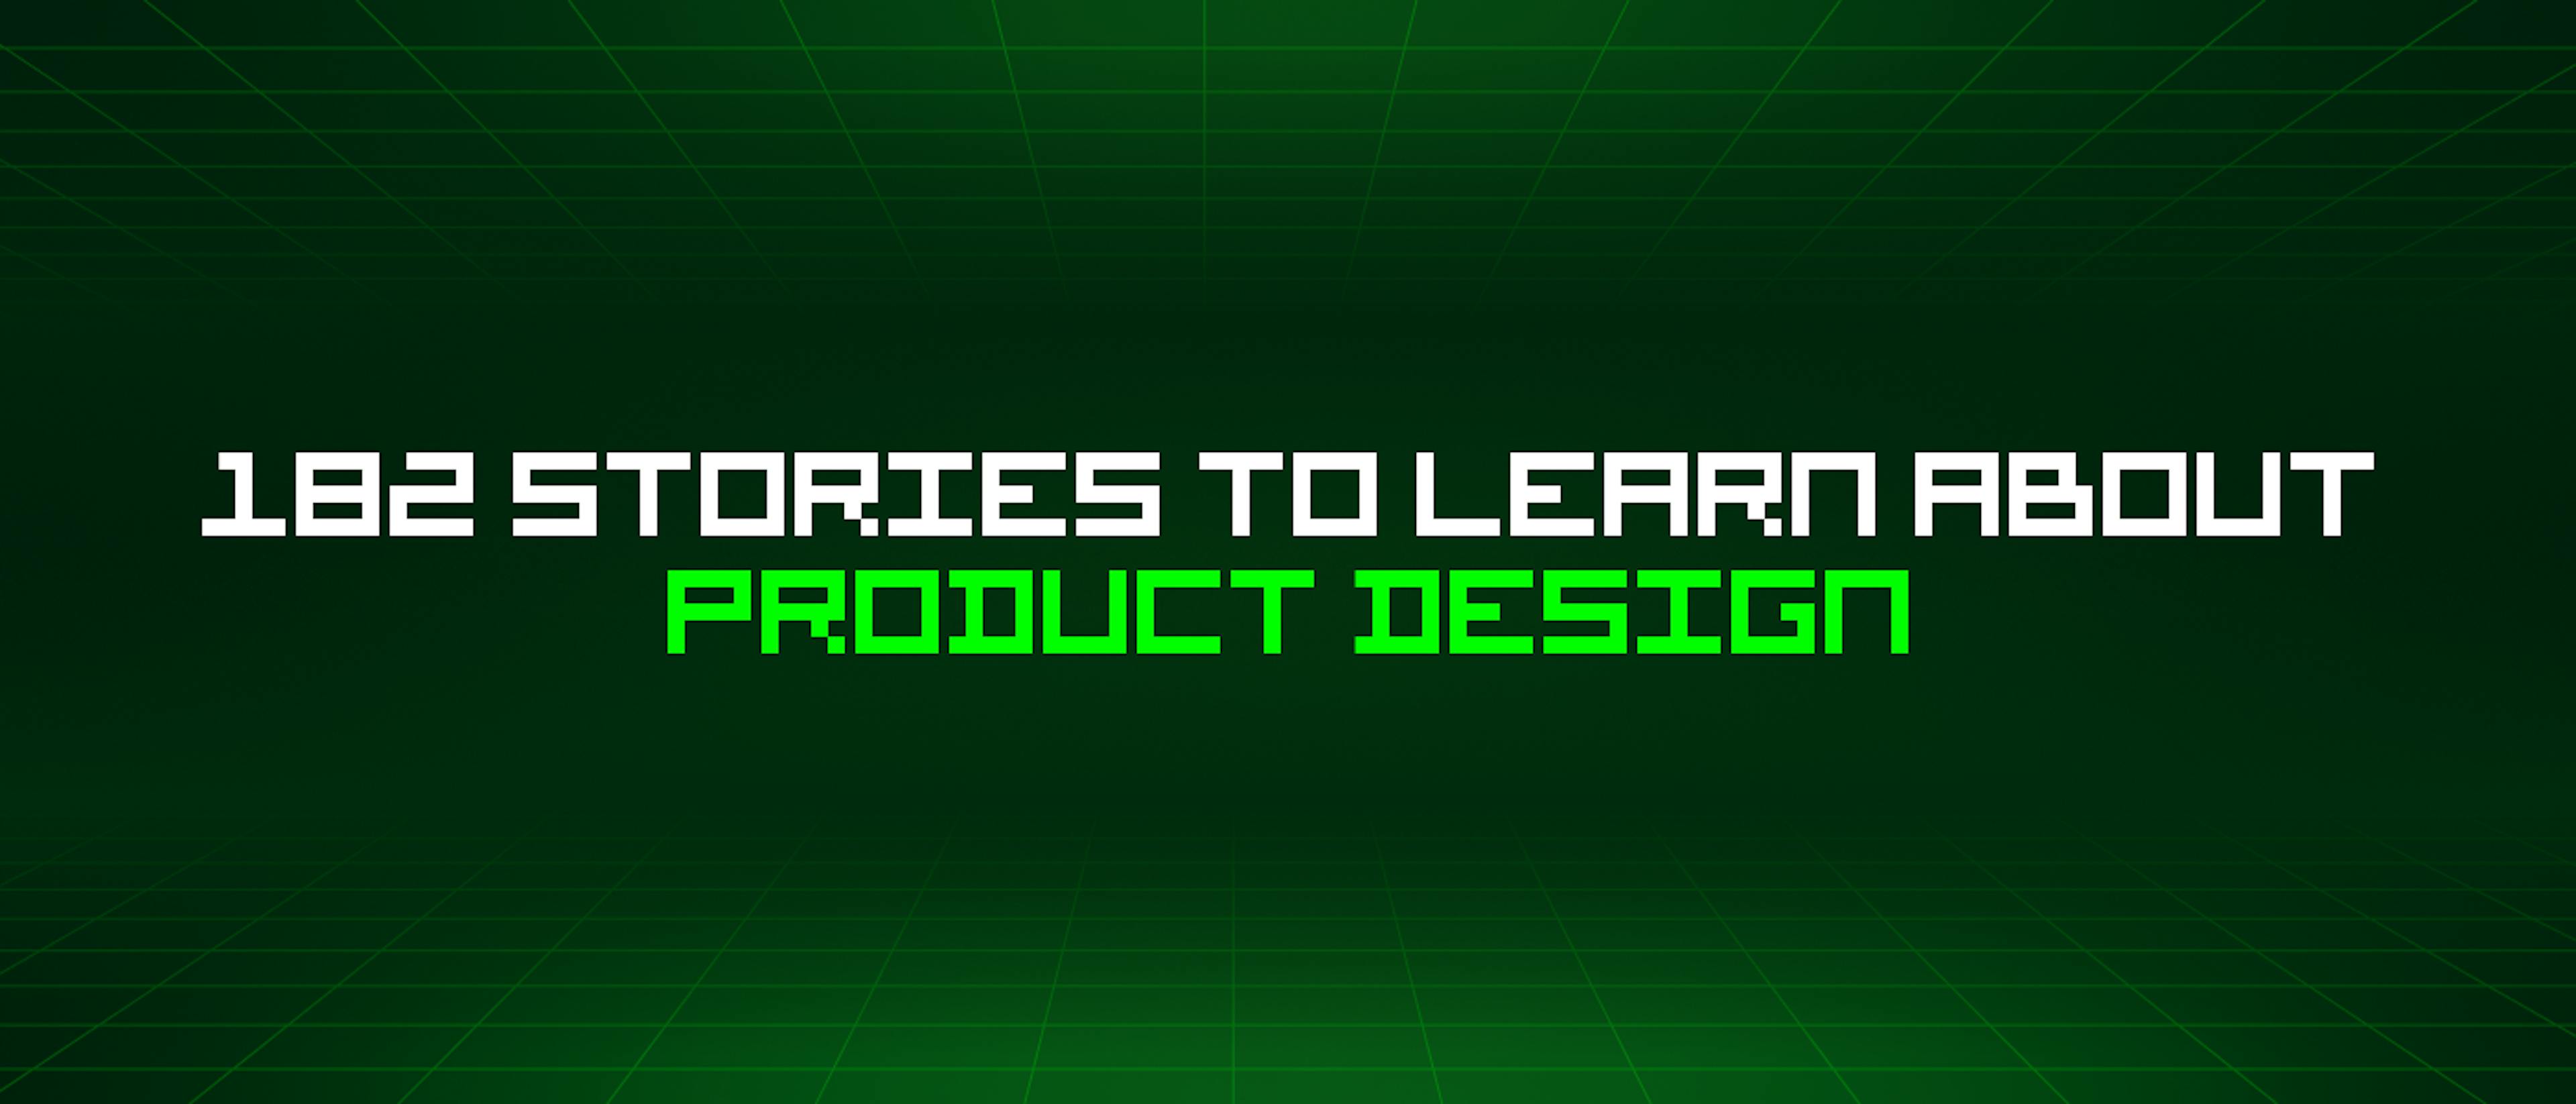 featured image - 182 Stories To Learn About Product Design